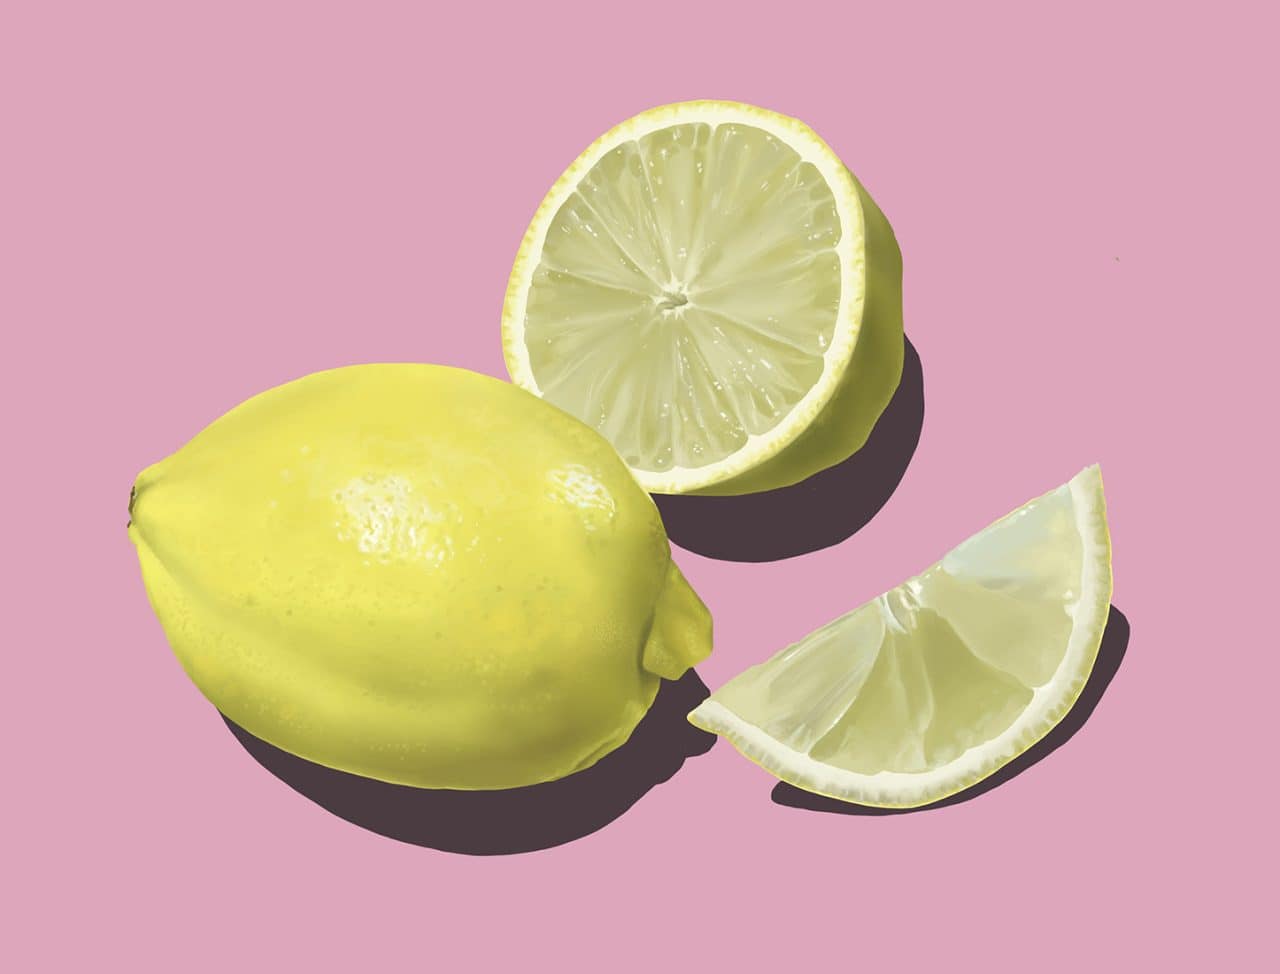 Now you're an expert on how to make a realistic lemon drawing!